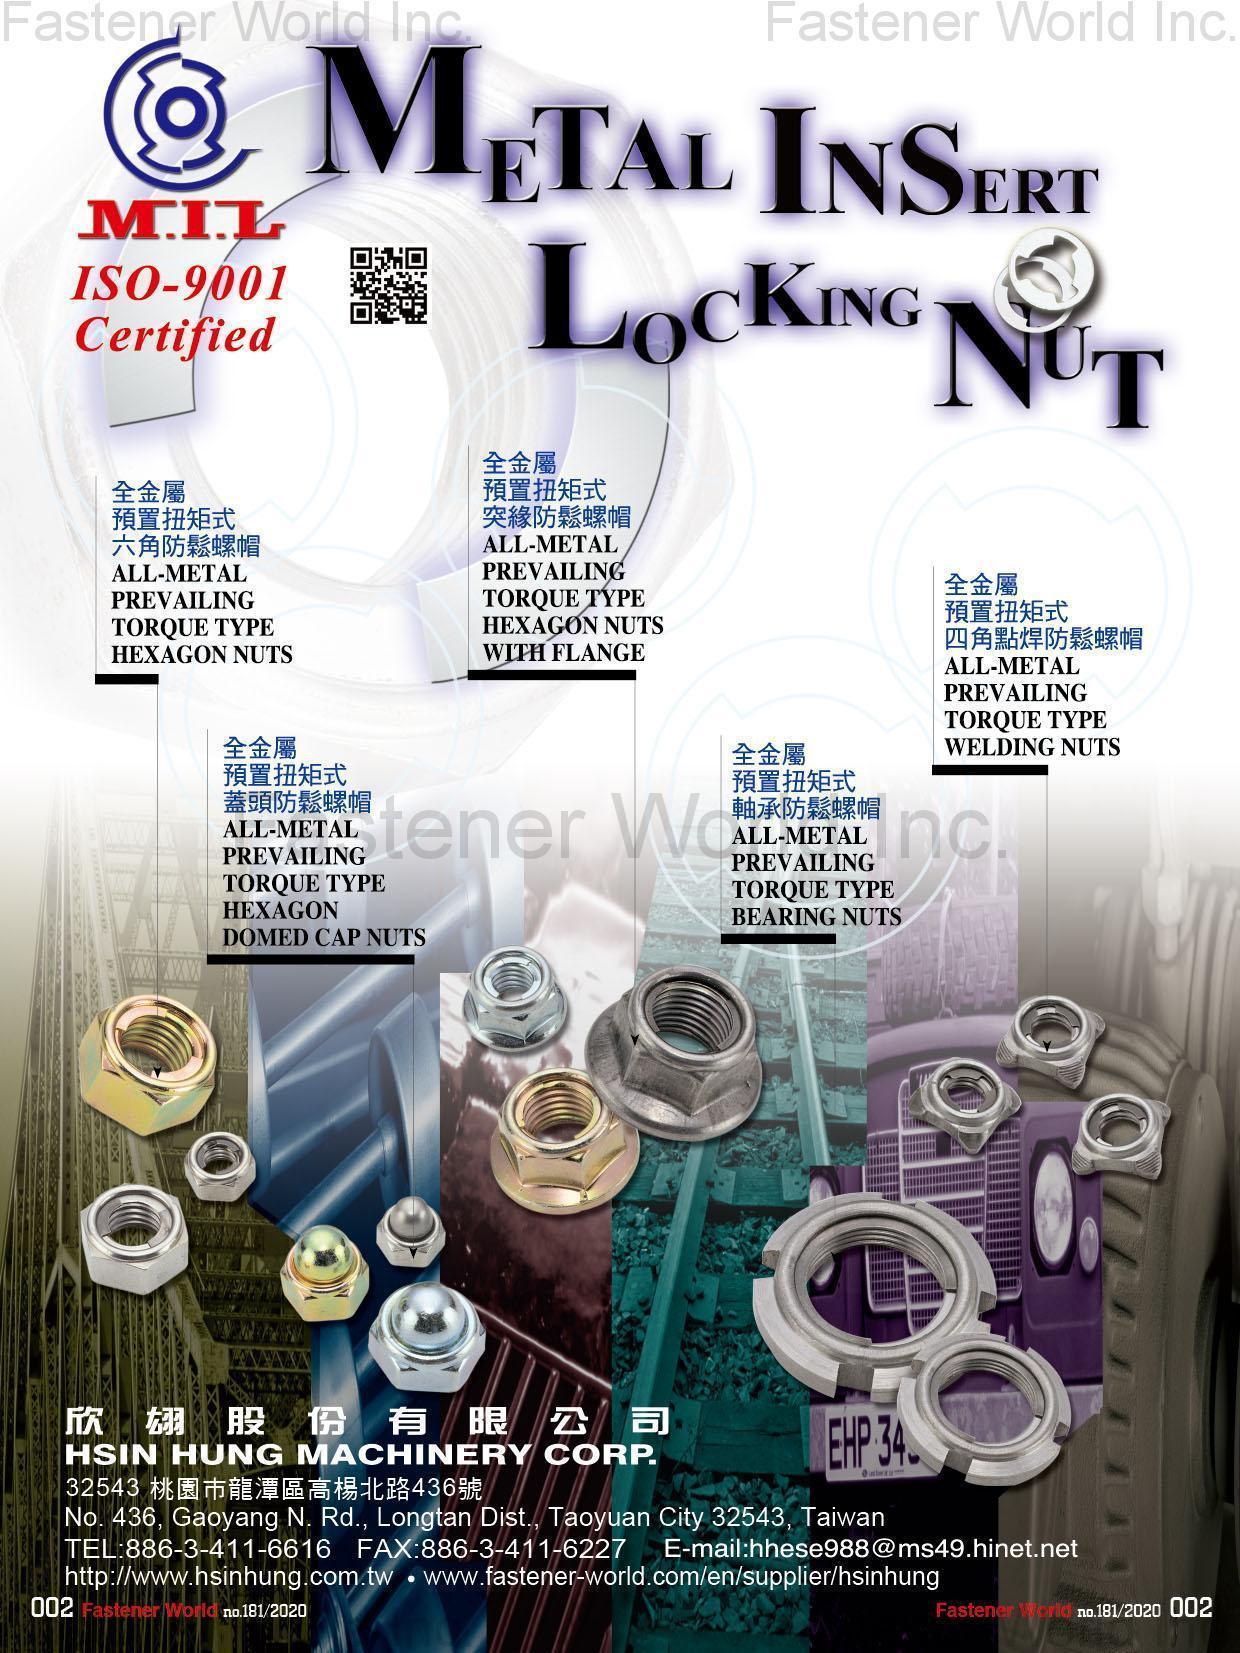 HSIN HUNG MACHINERY CORP.  , All-Metal Prevailing Torque Type Hexagon Nuts, All-Metal Prevailing Torque Type Hexagon Nuts With Flange, ALL-Metal Prevailing Torque Type Hexagon Domed Cap Nuts, All-Metal Prevailing Torque Type Bearing Nuts, All-Metal Prevailing Torque Type Welding Nuts